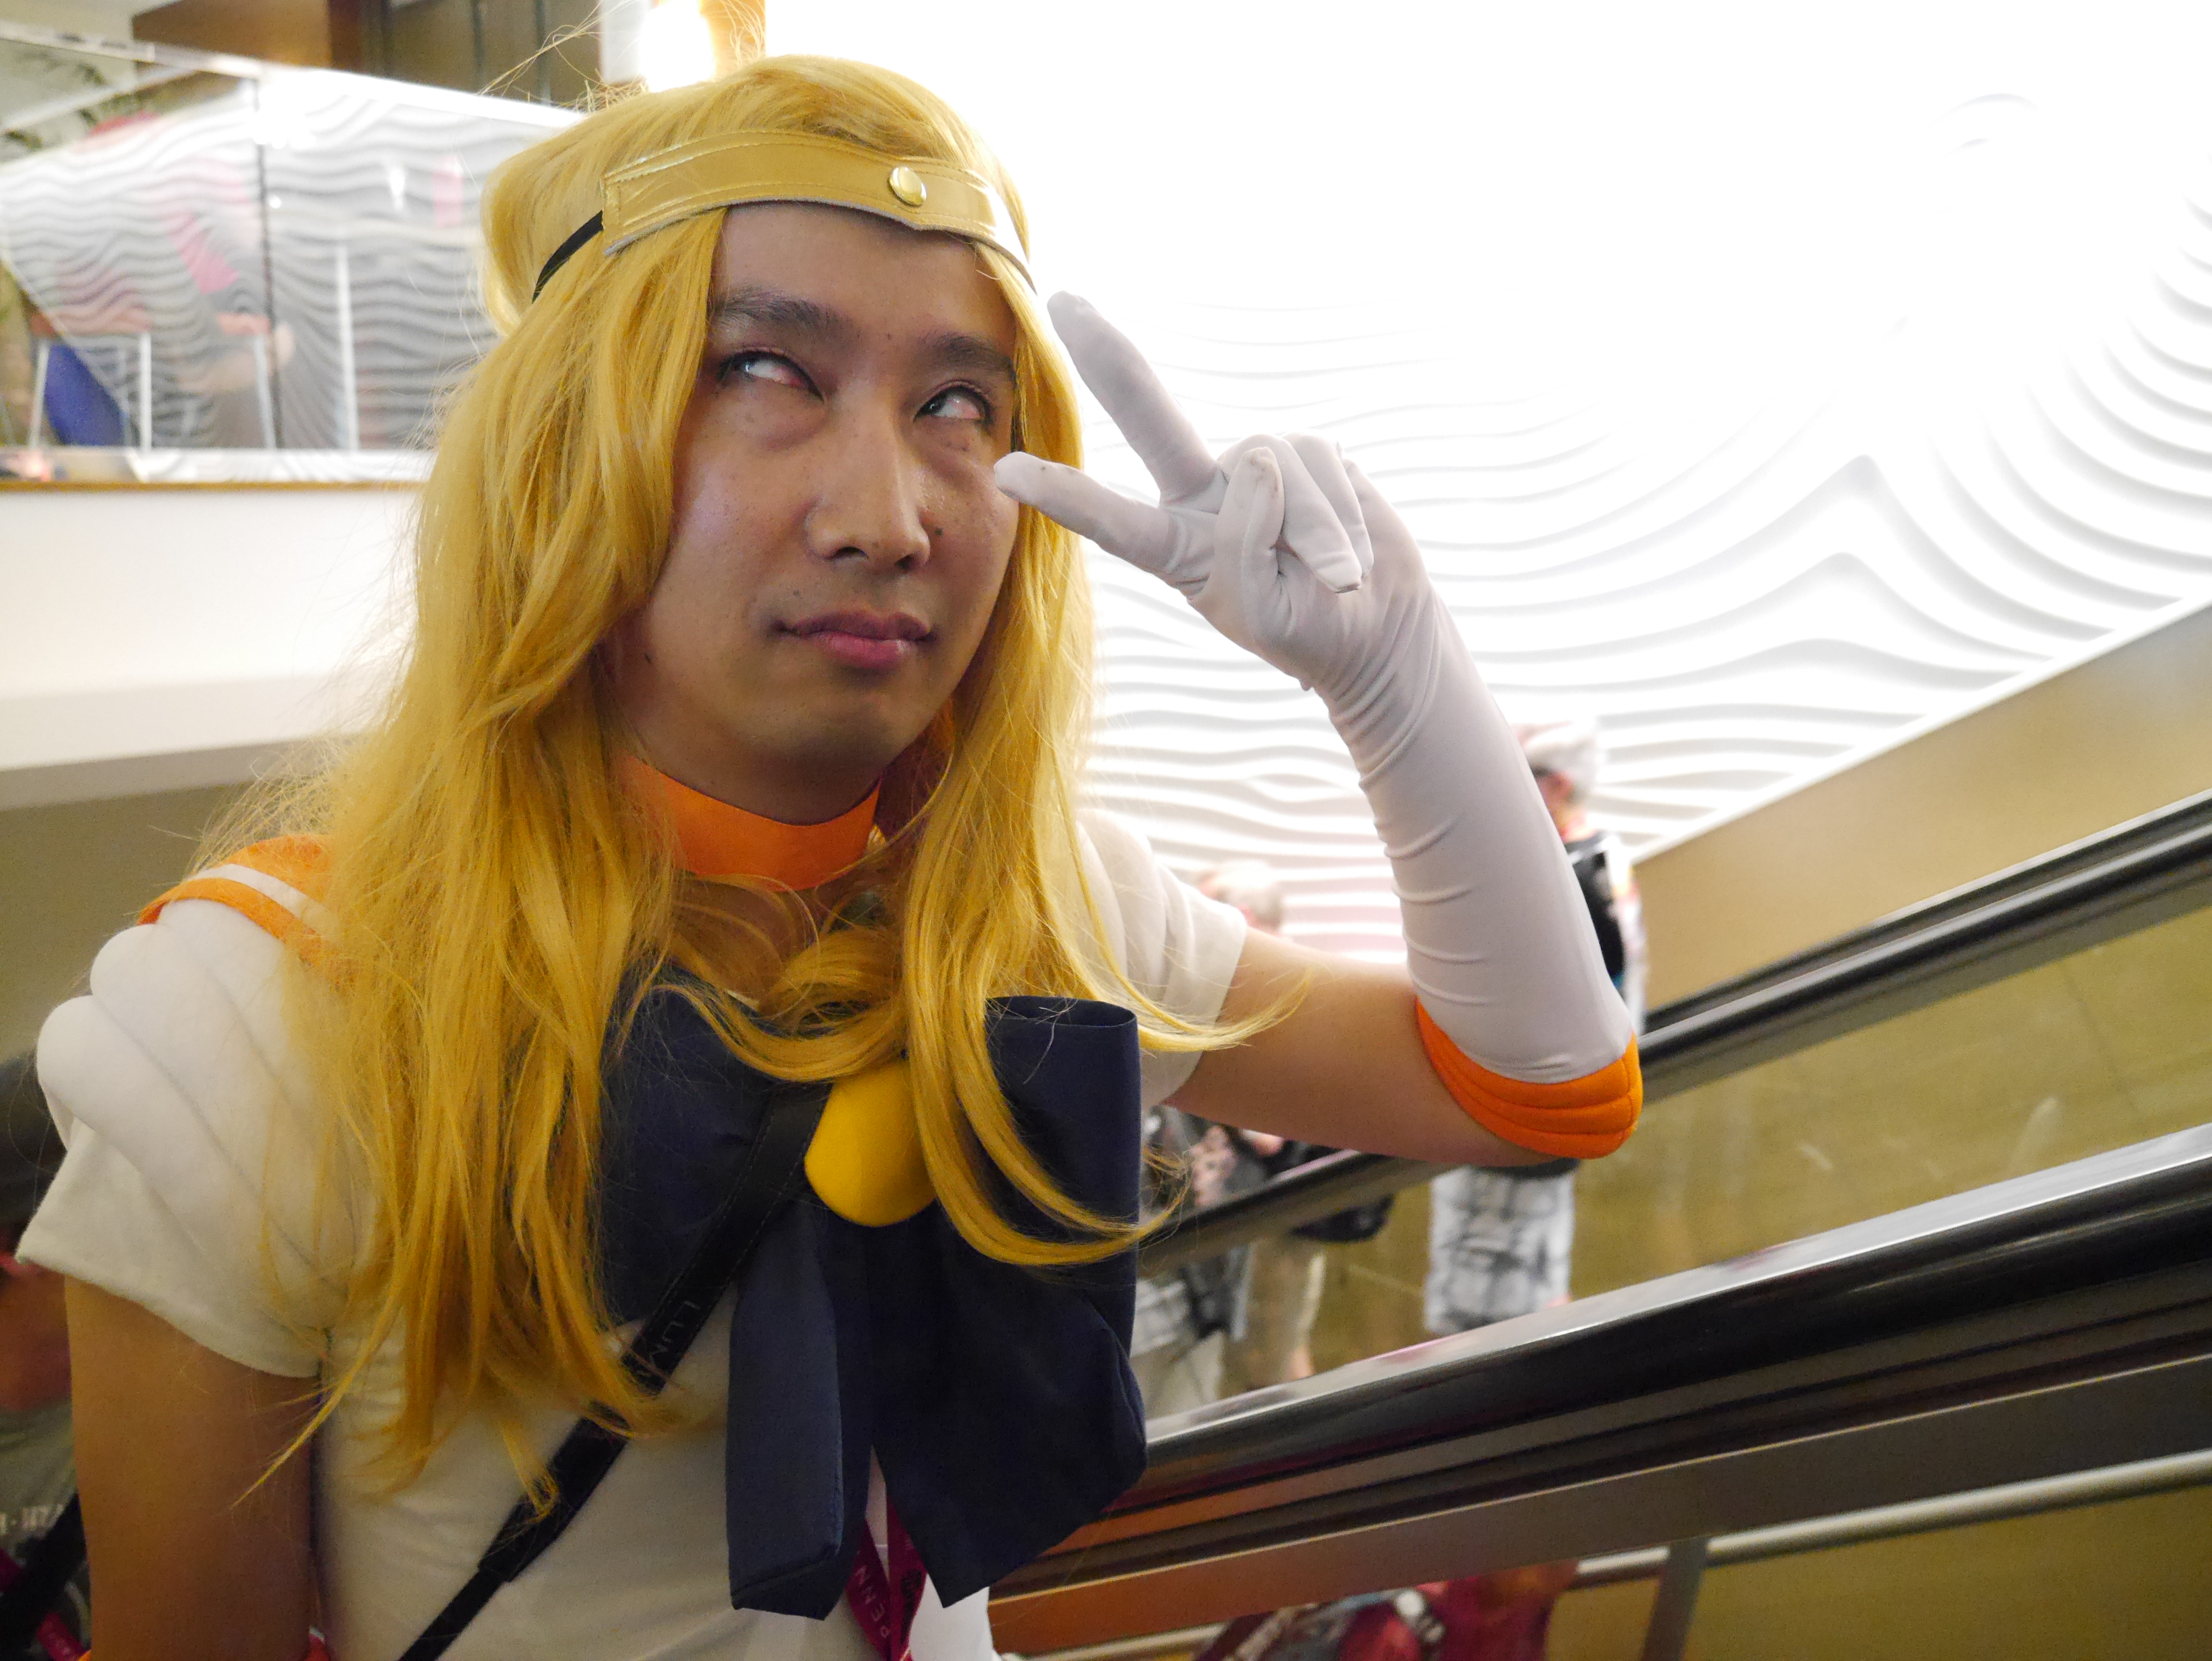 Our reporter goes looking for fans at Comic-Con…in his Sailor